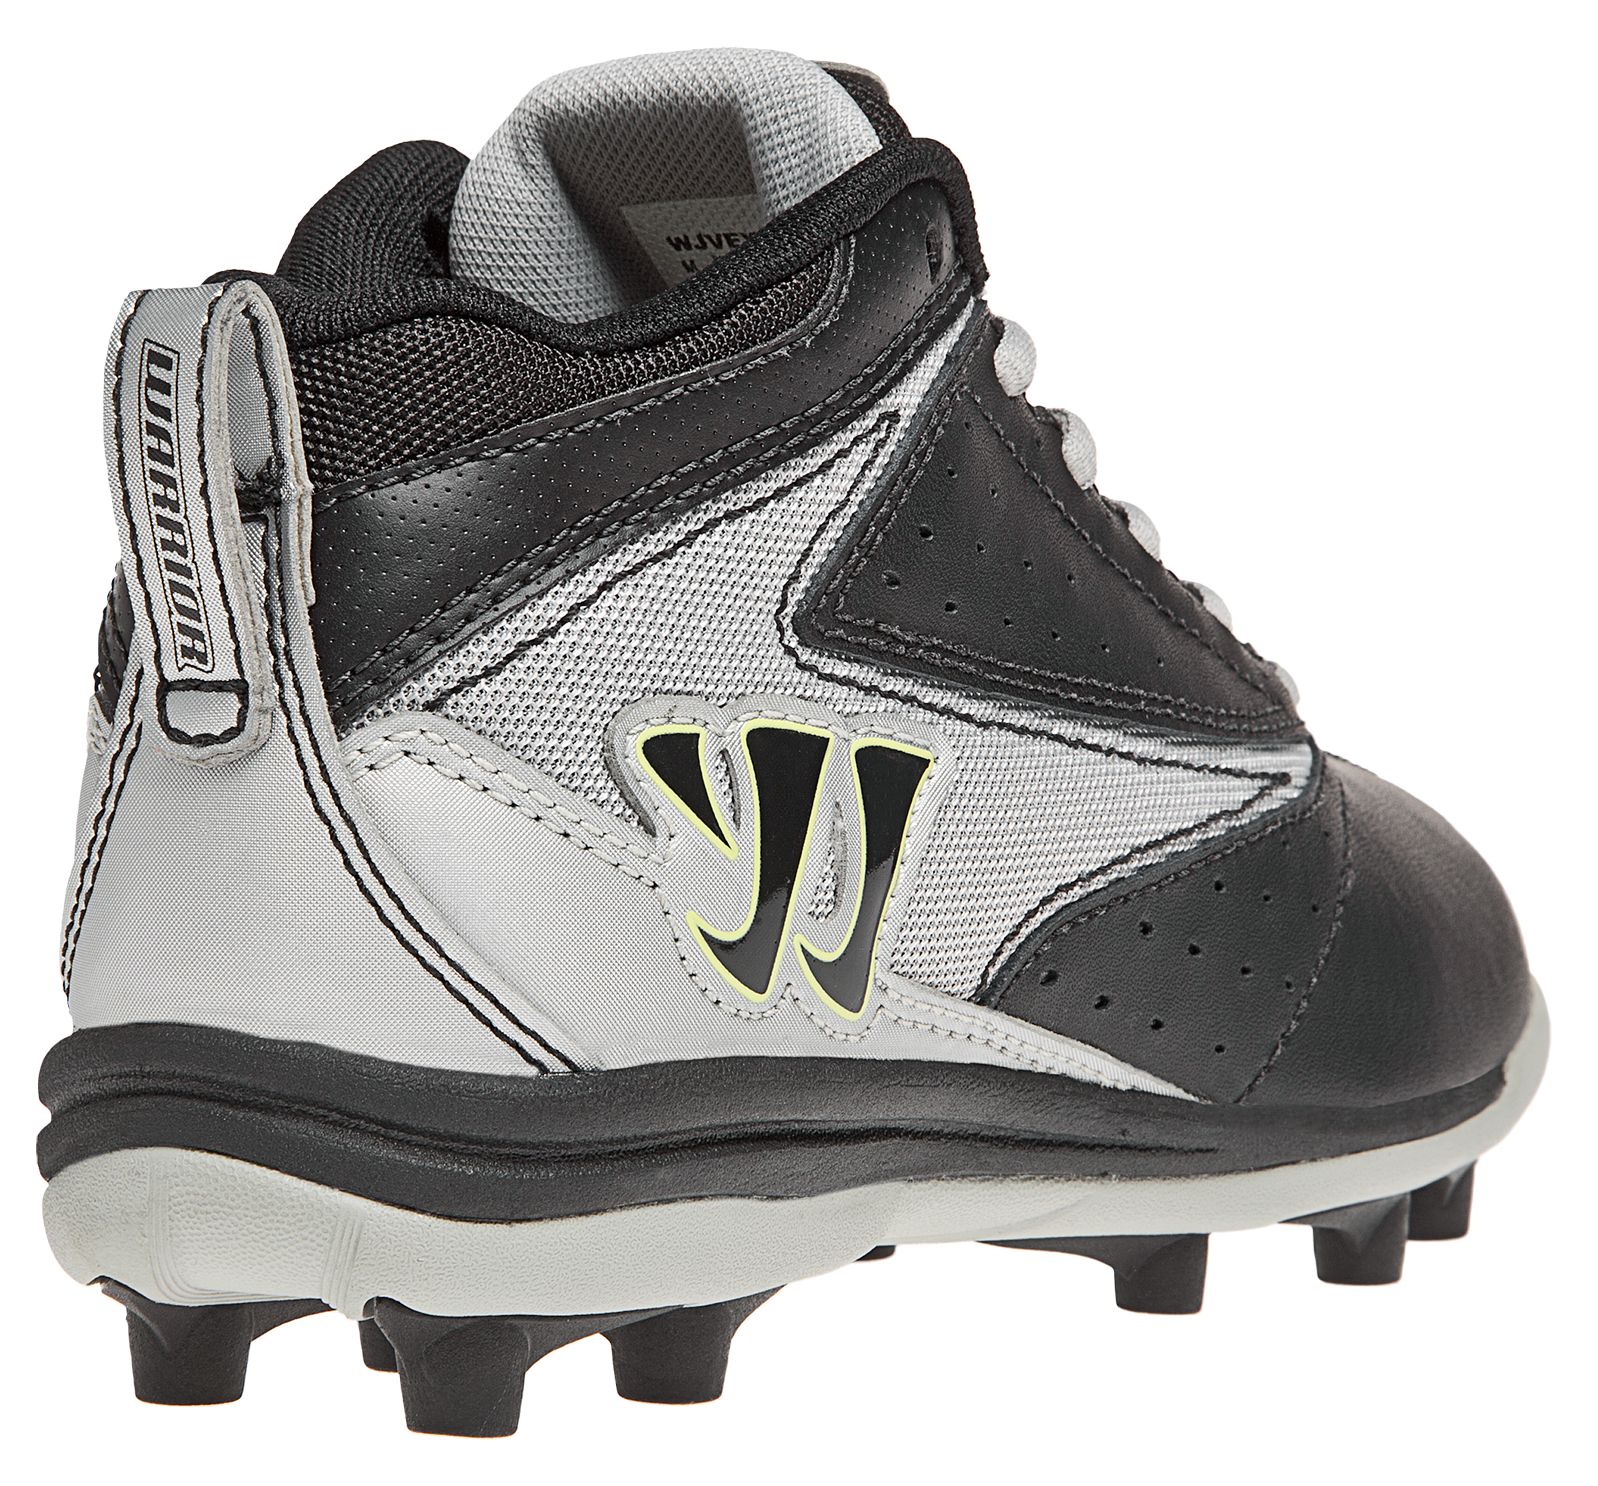 Youth Vex 3.0 Cleat, Black with White image number 4